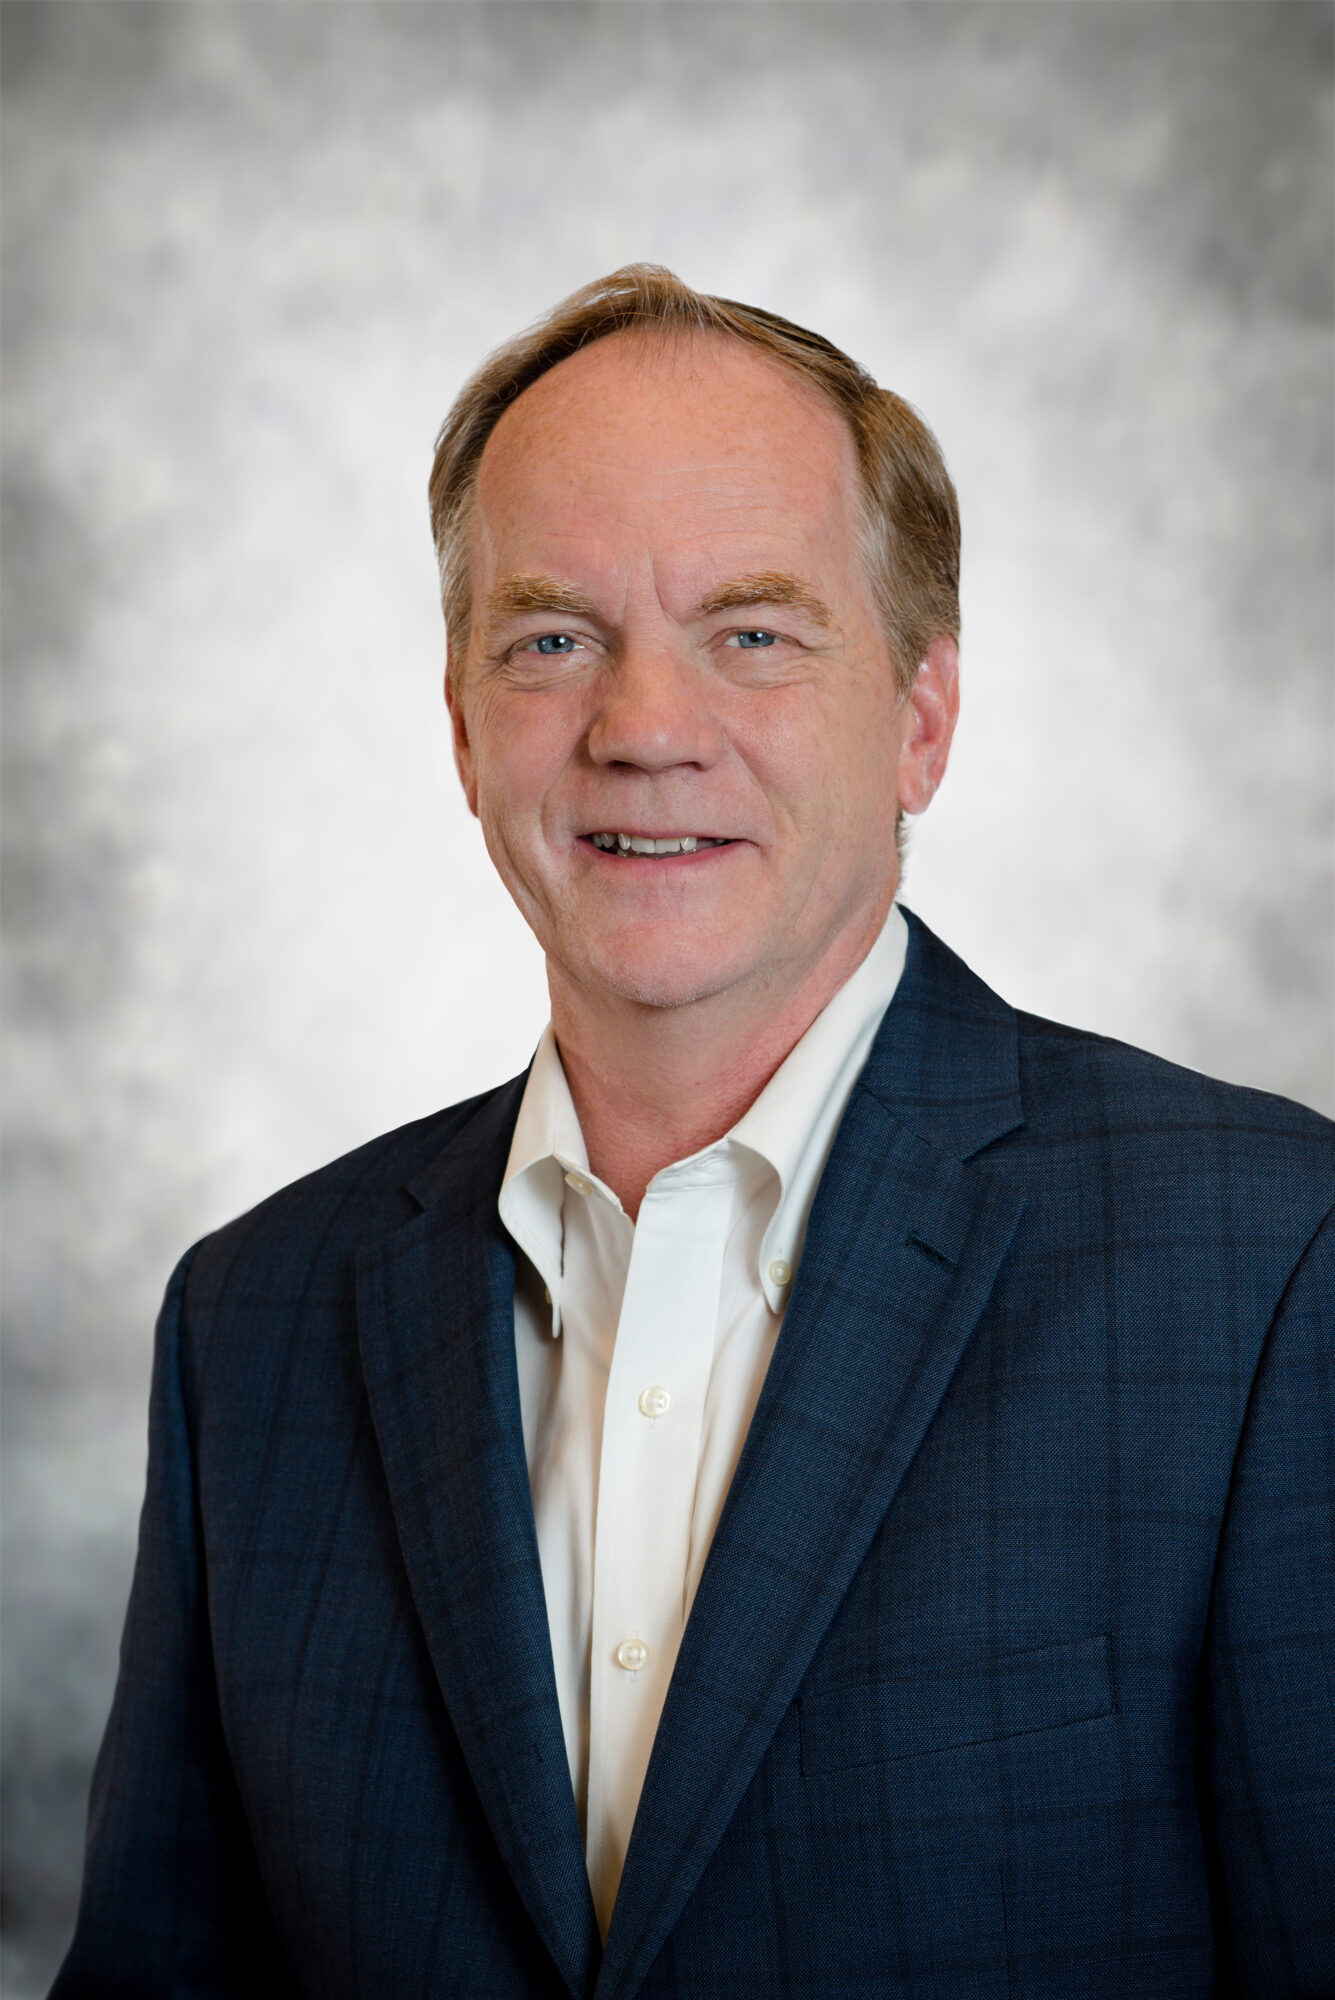 PSNI Global Alliance, the world’s largest unified network of leading technology integrators, manufacturers, and service providers, welcomes former Diversified President Kevin Collins to its Board of Directors, where he joins as Strategic Advisor.